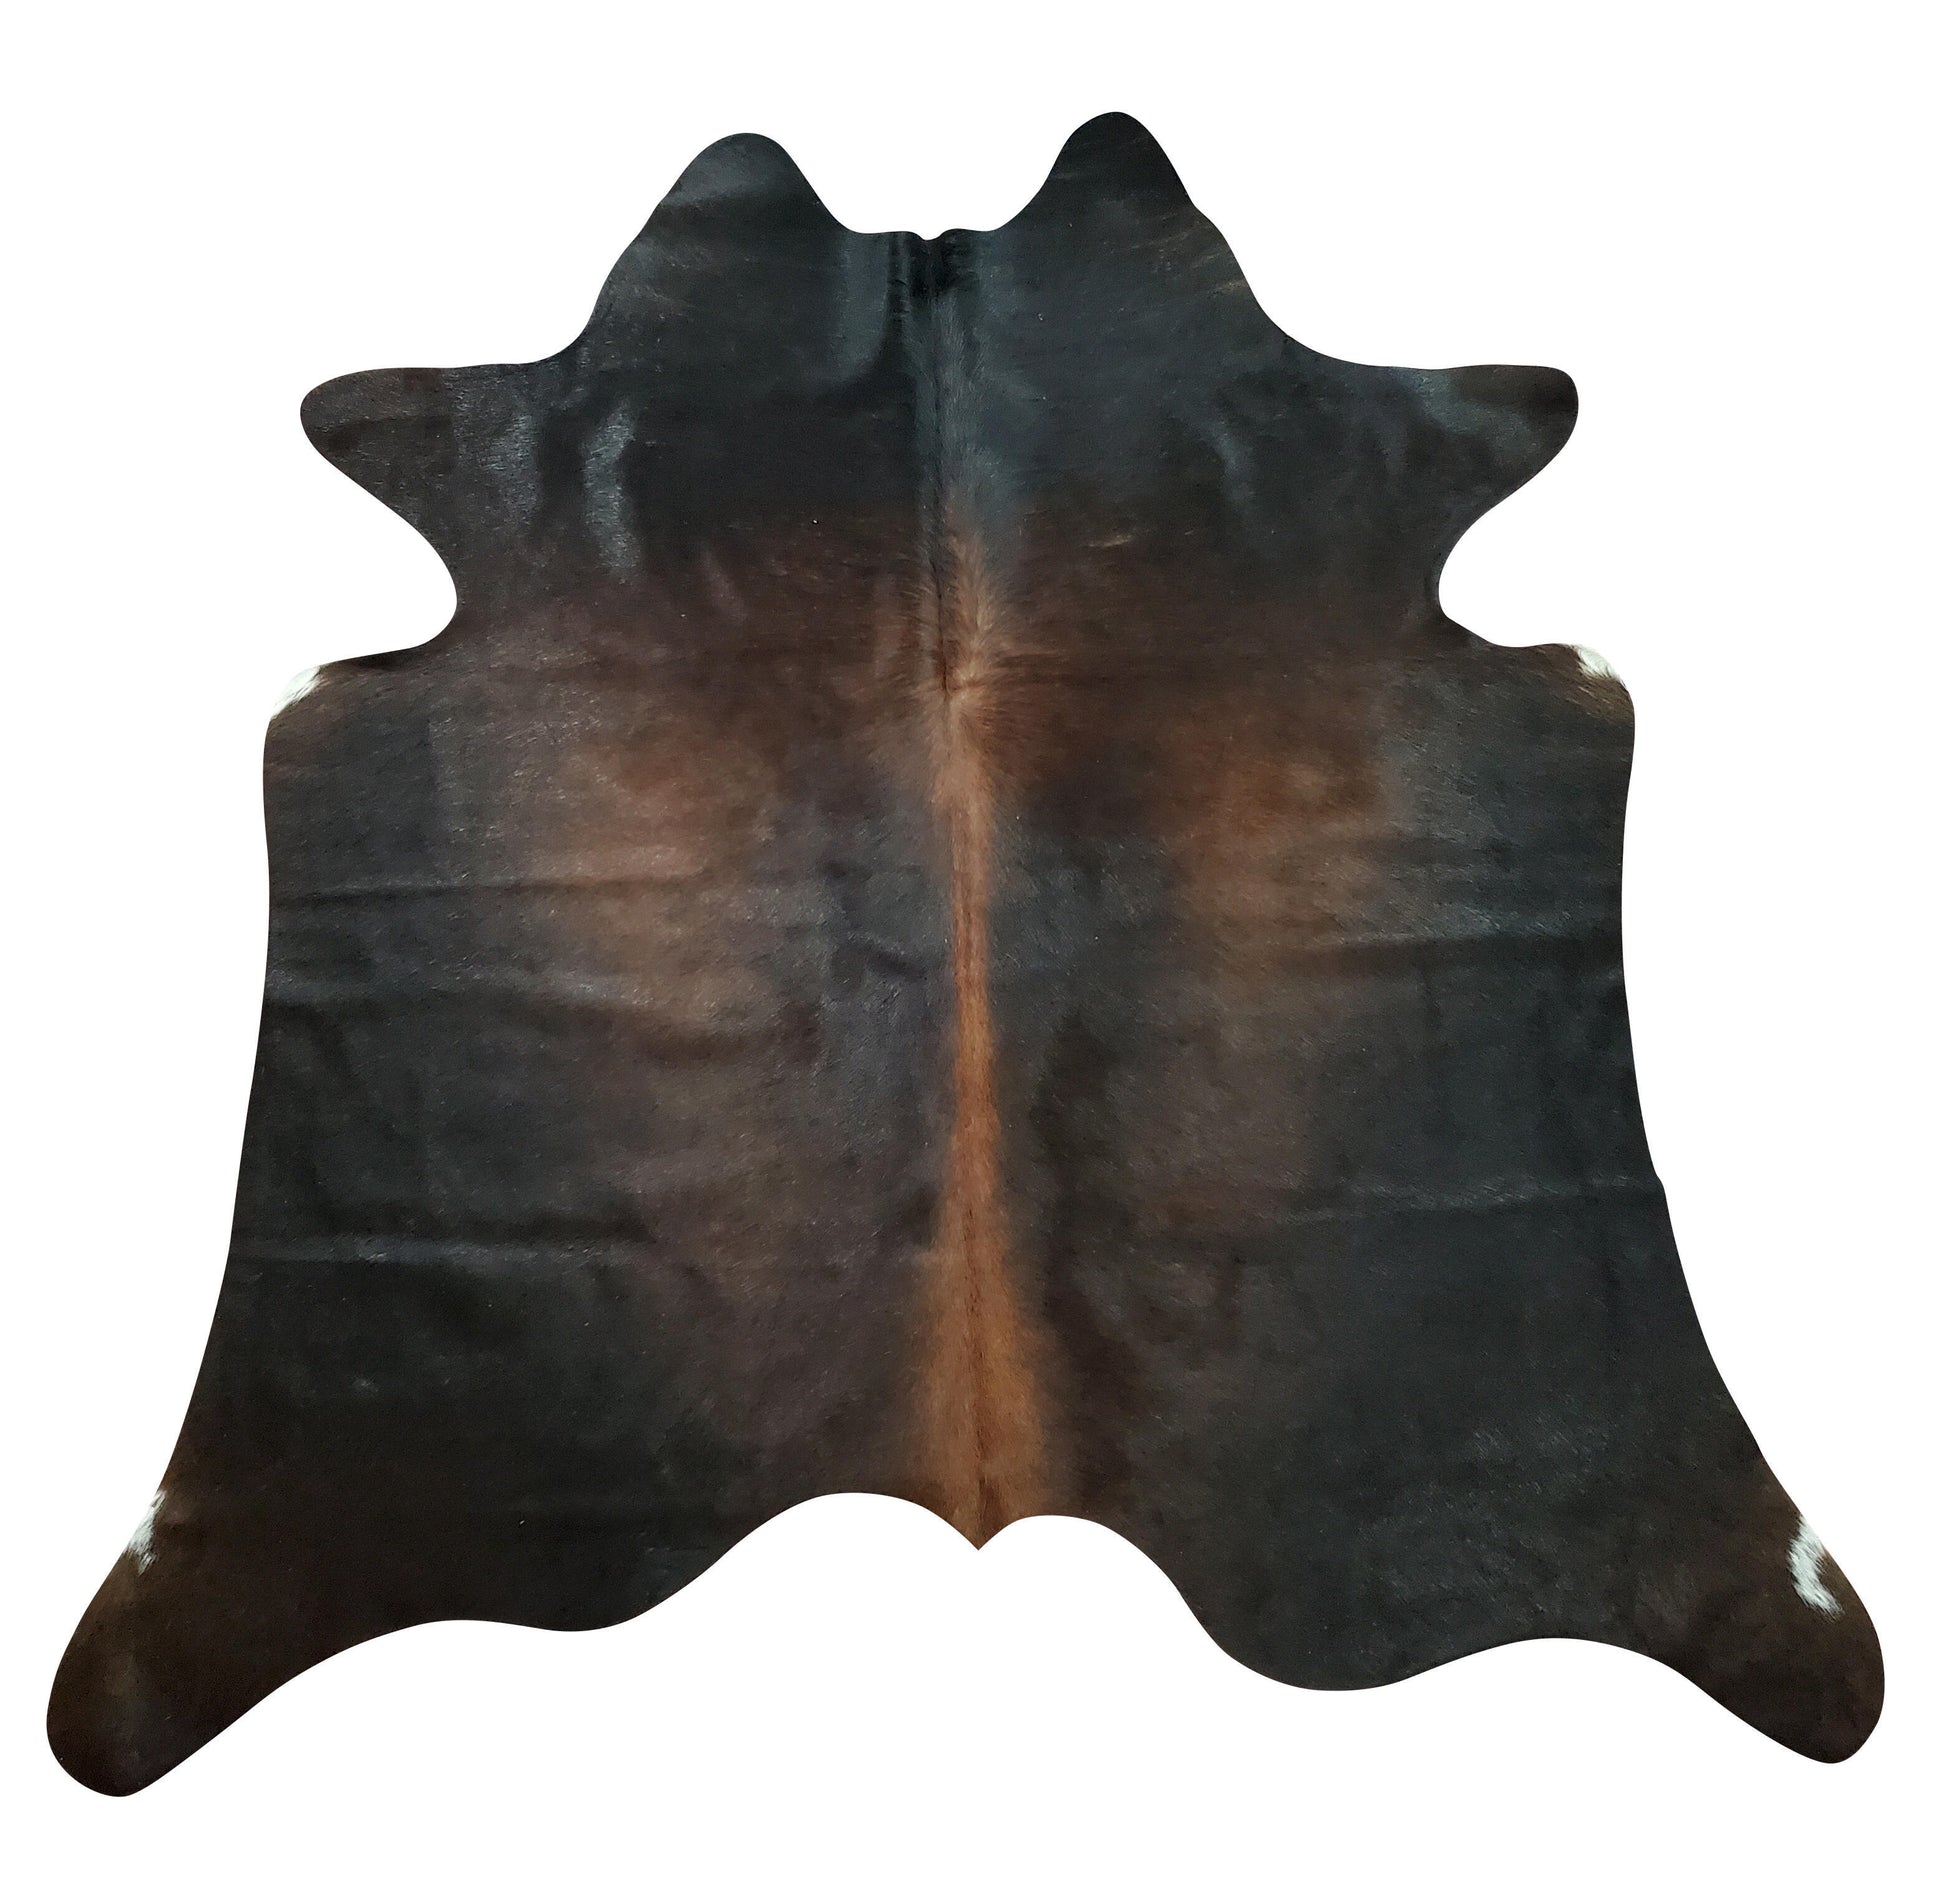 This mini cowhide rug fits flawlessly in a small living room, looks stylish and soft.